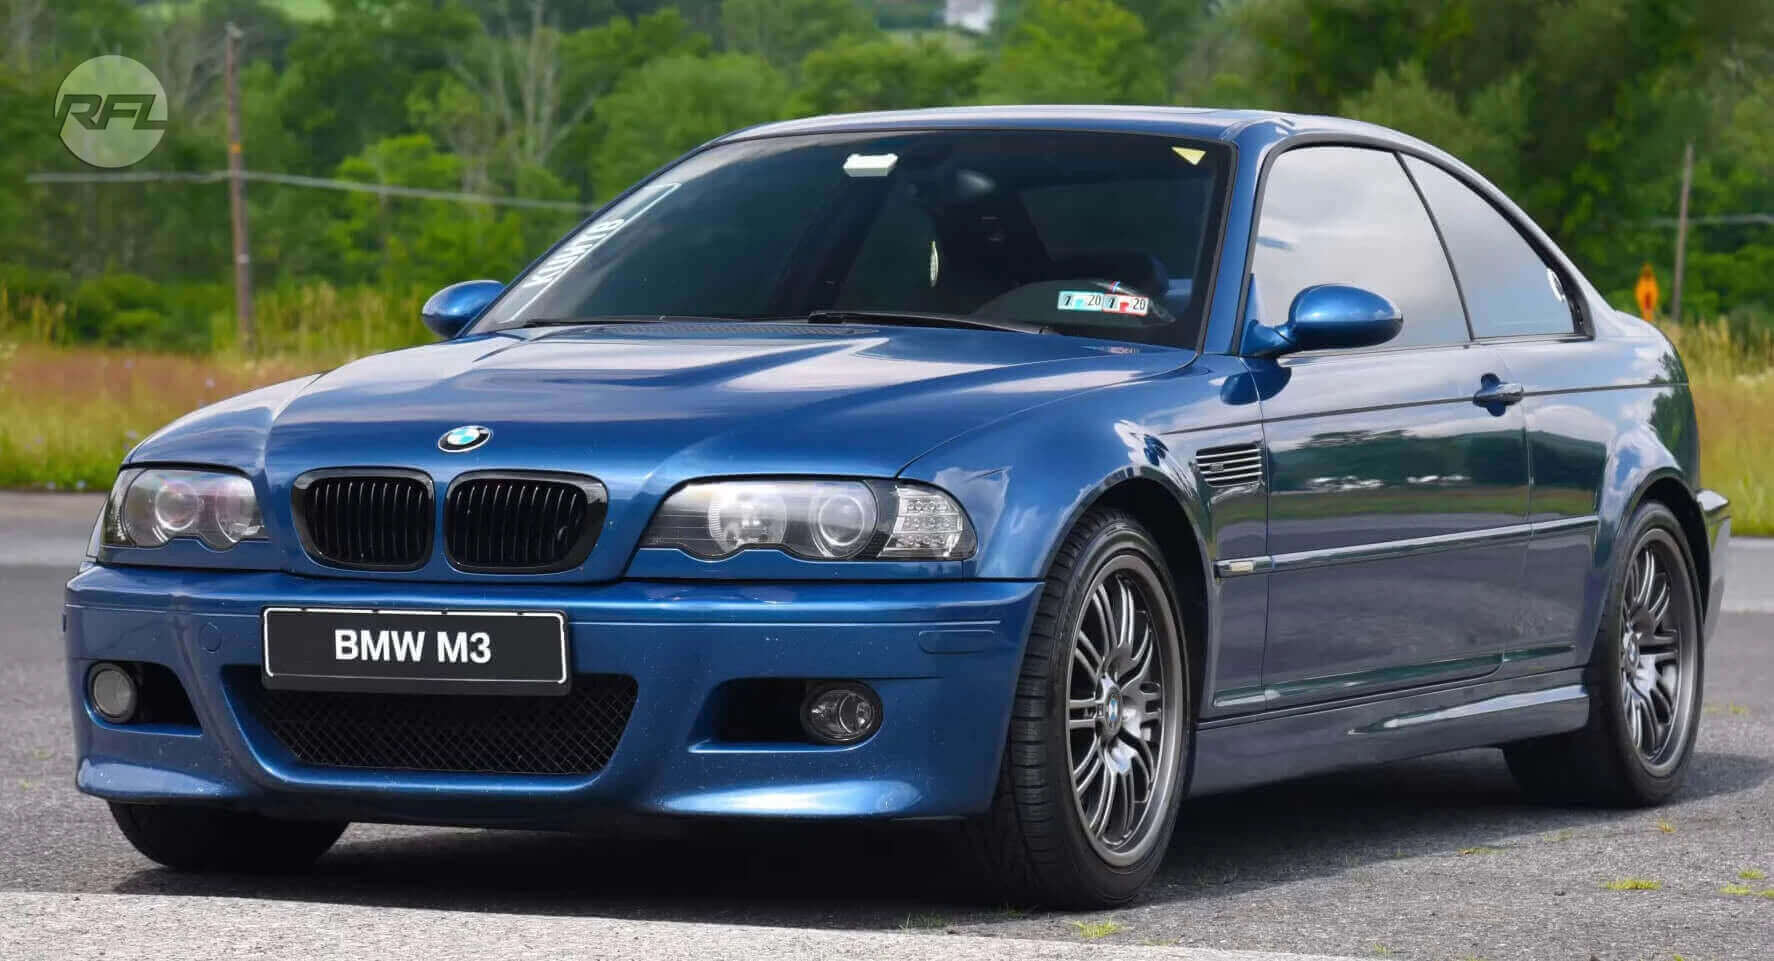 BMW E46 headlight page information and repair upgrade options, e46